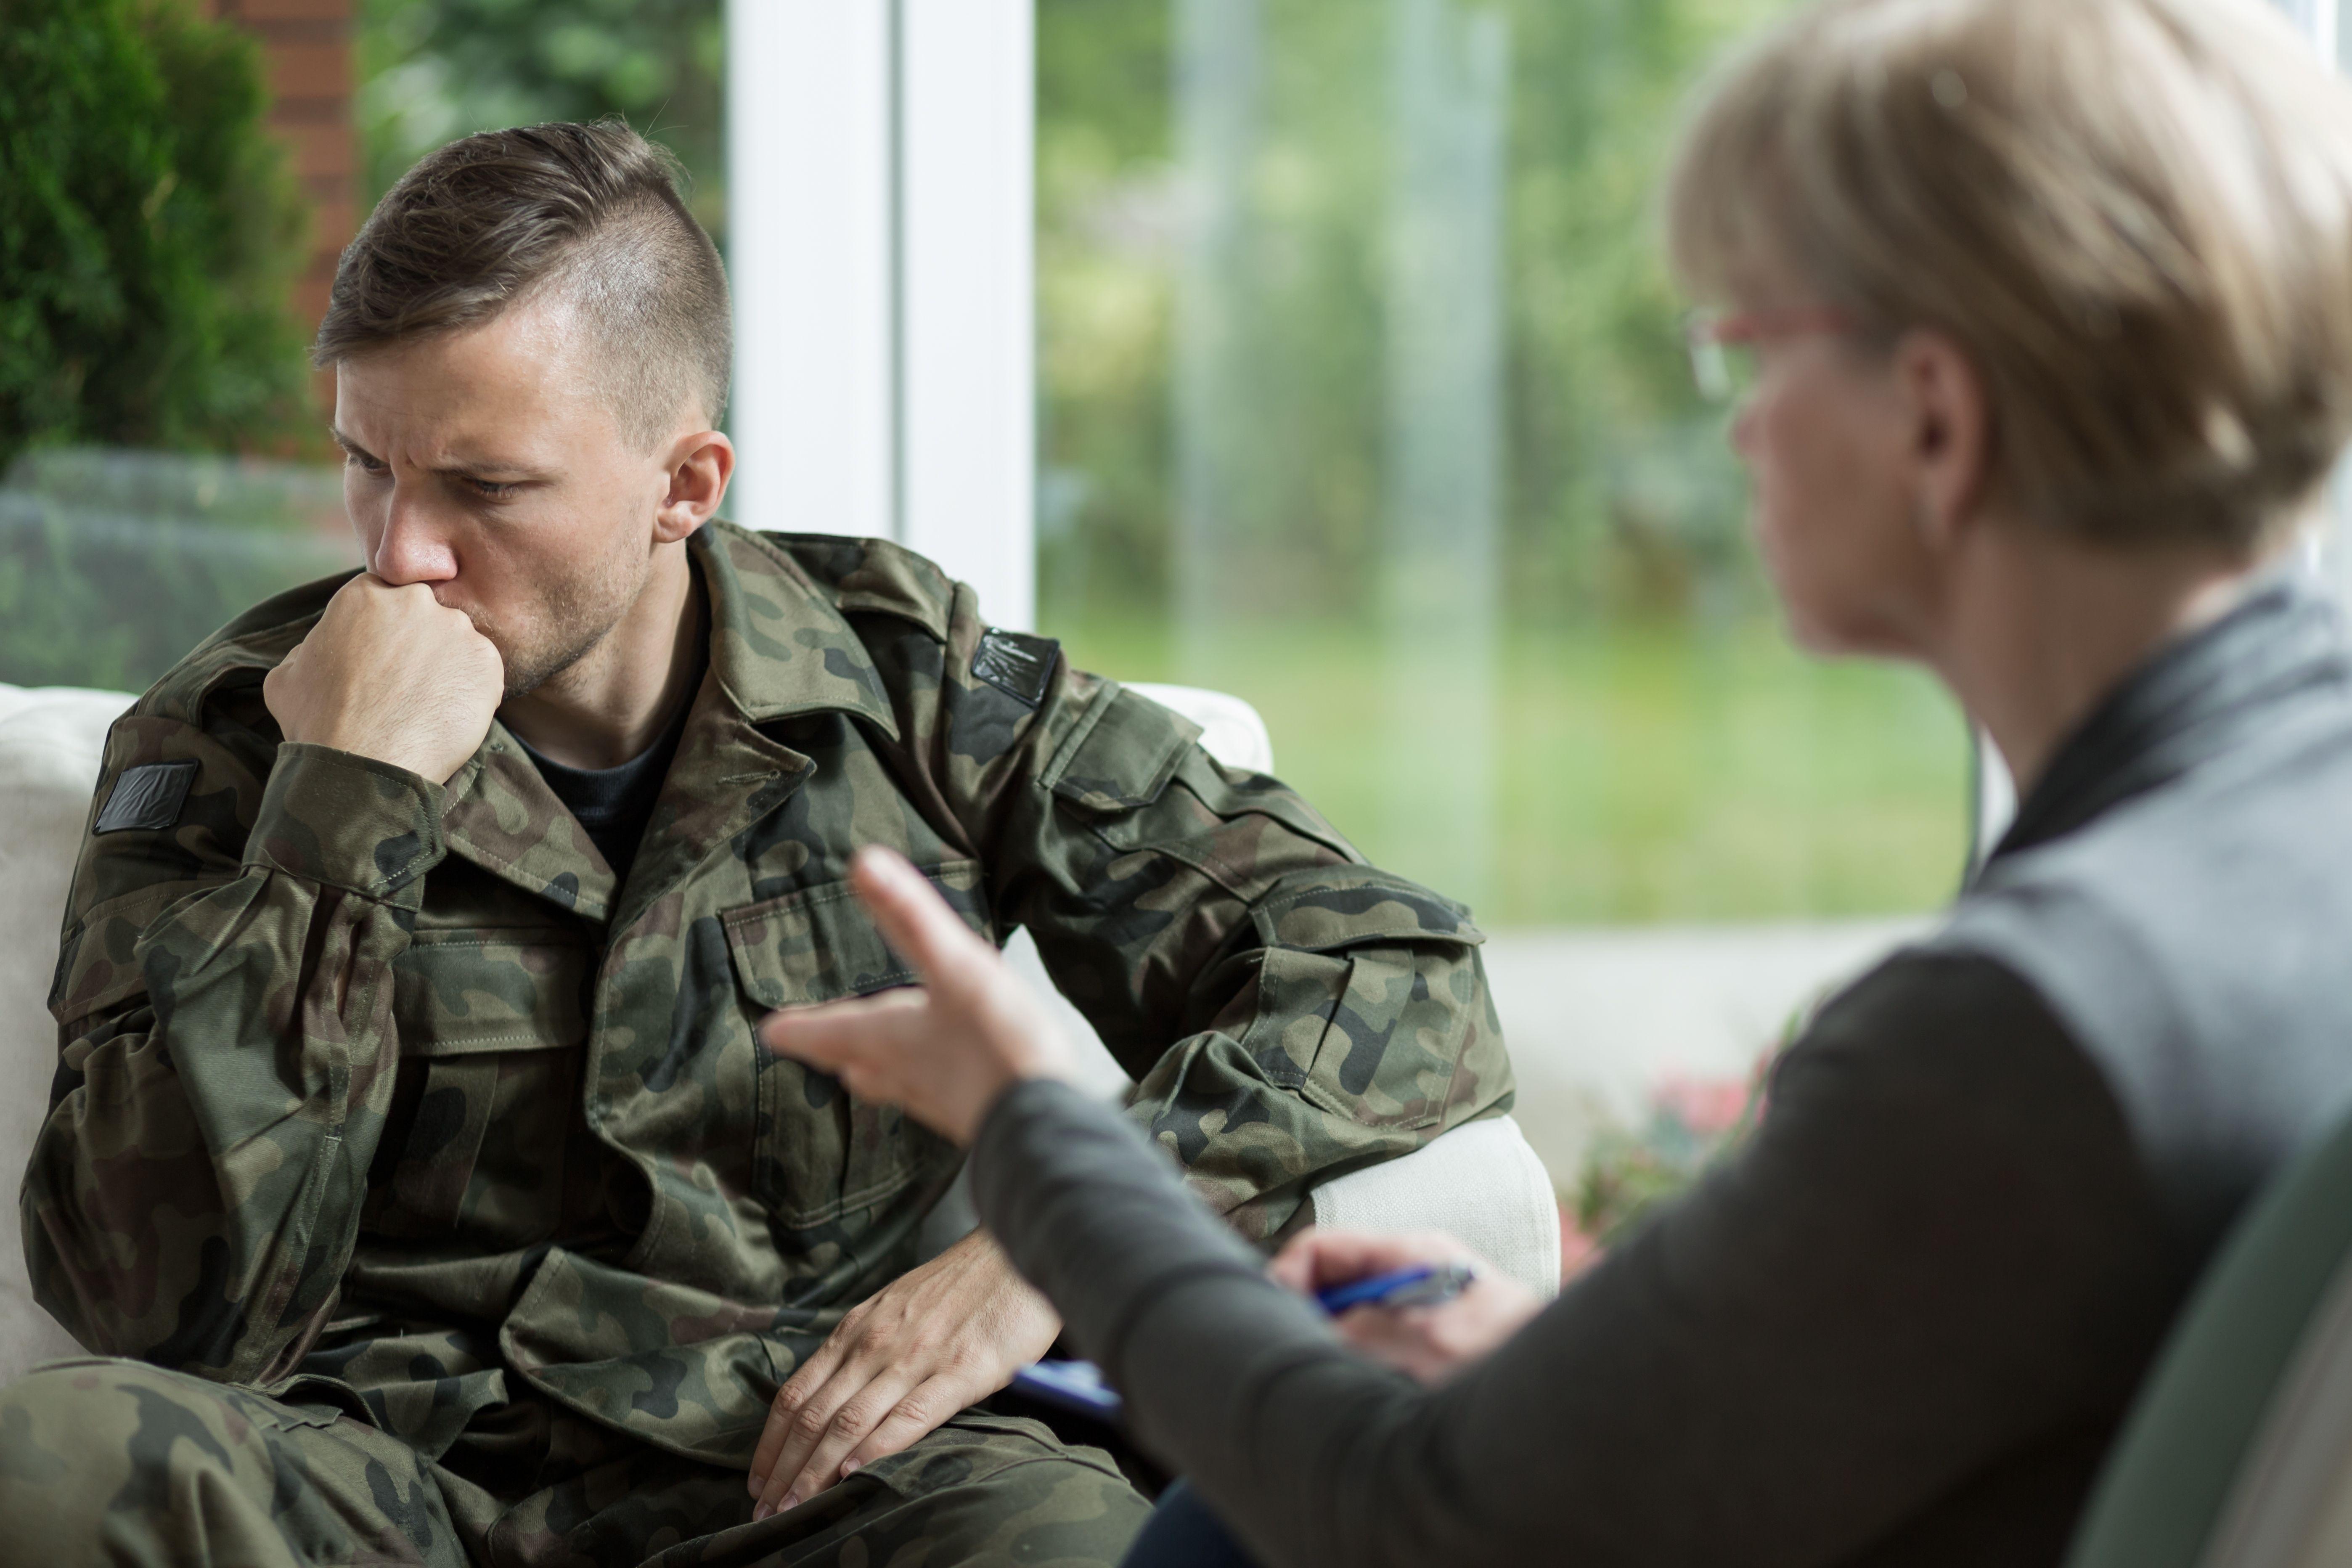 Male army veteran in support session with female clinician